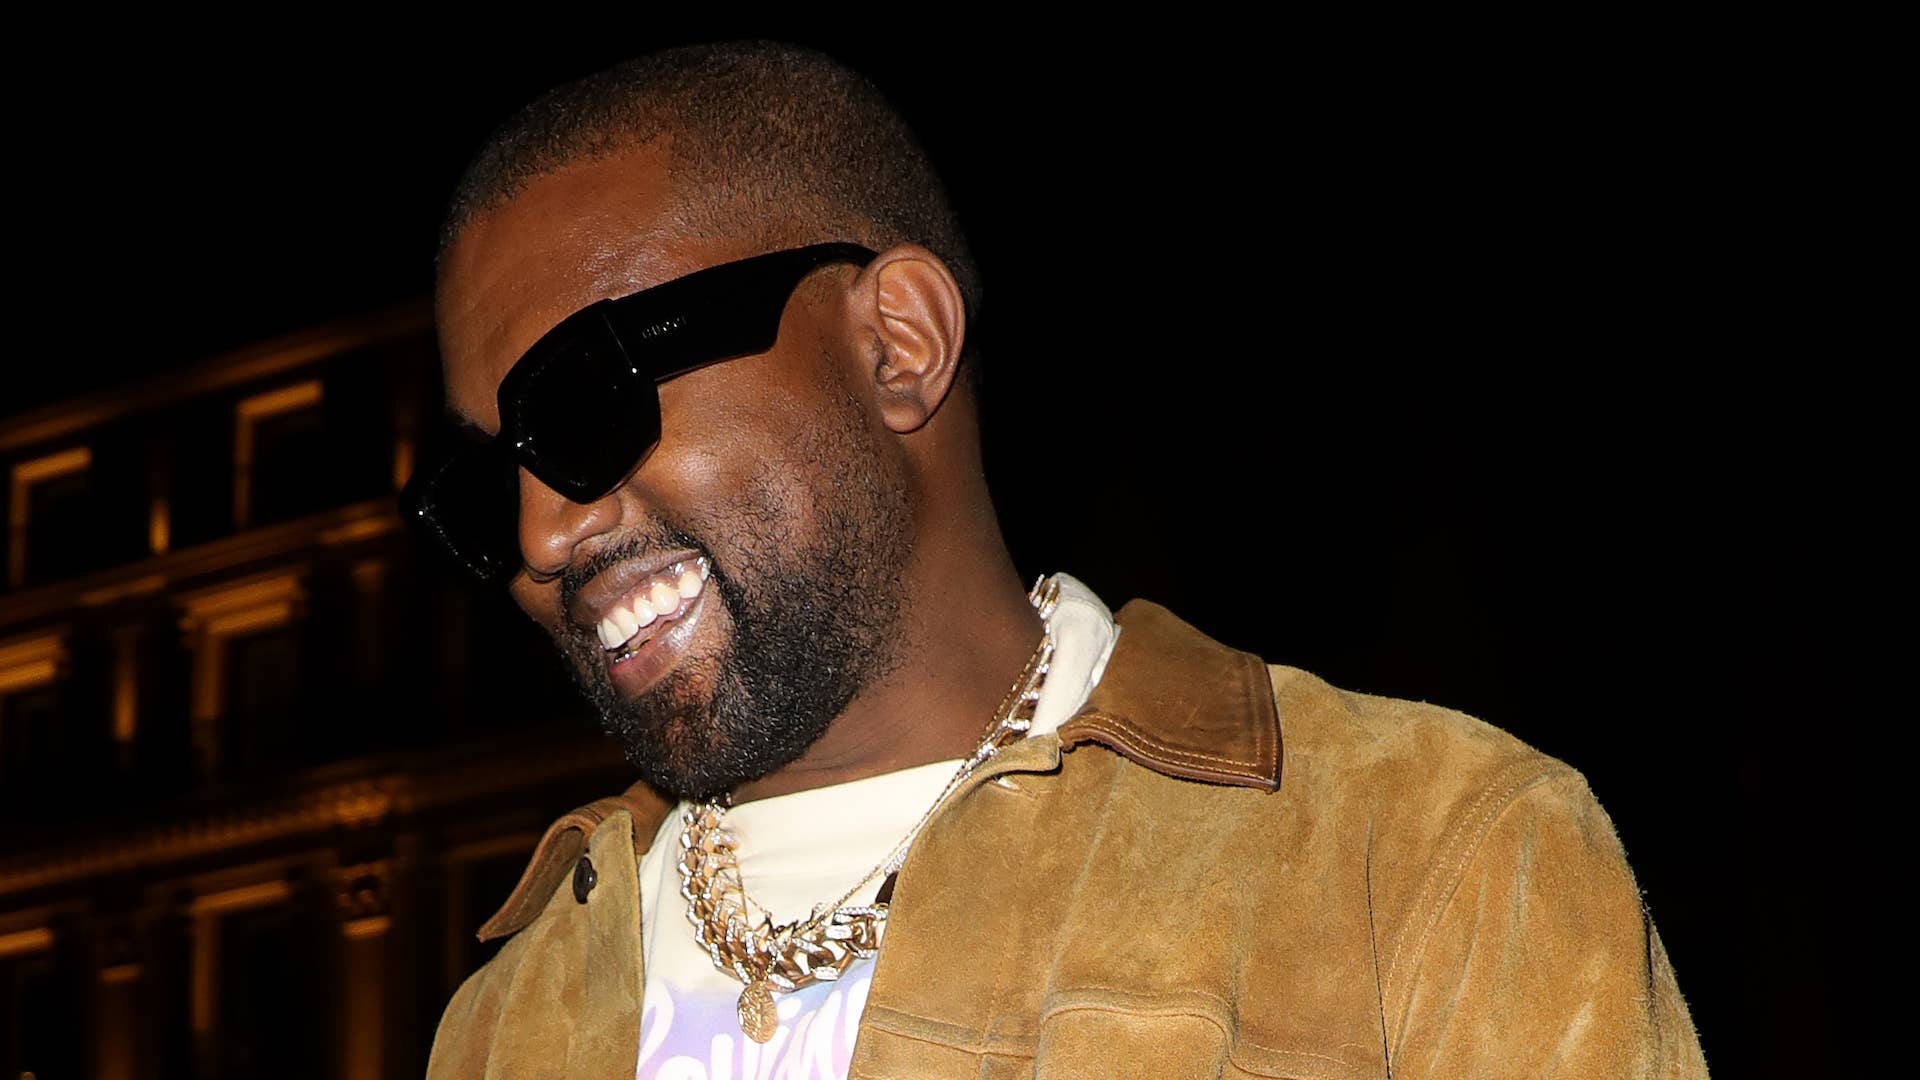 Kanye West is seen leaving a restaurant after his show